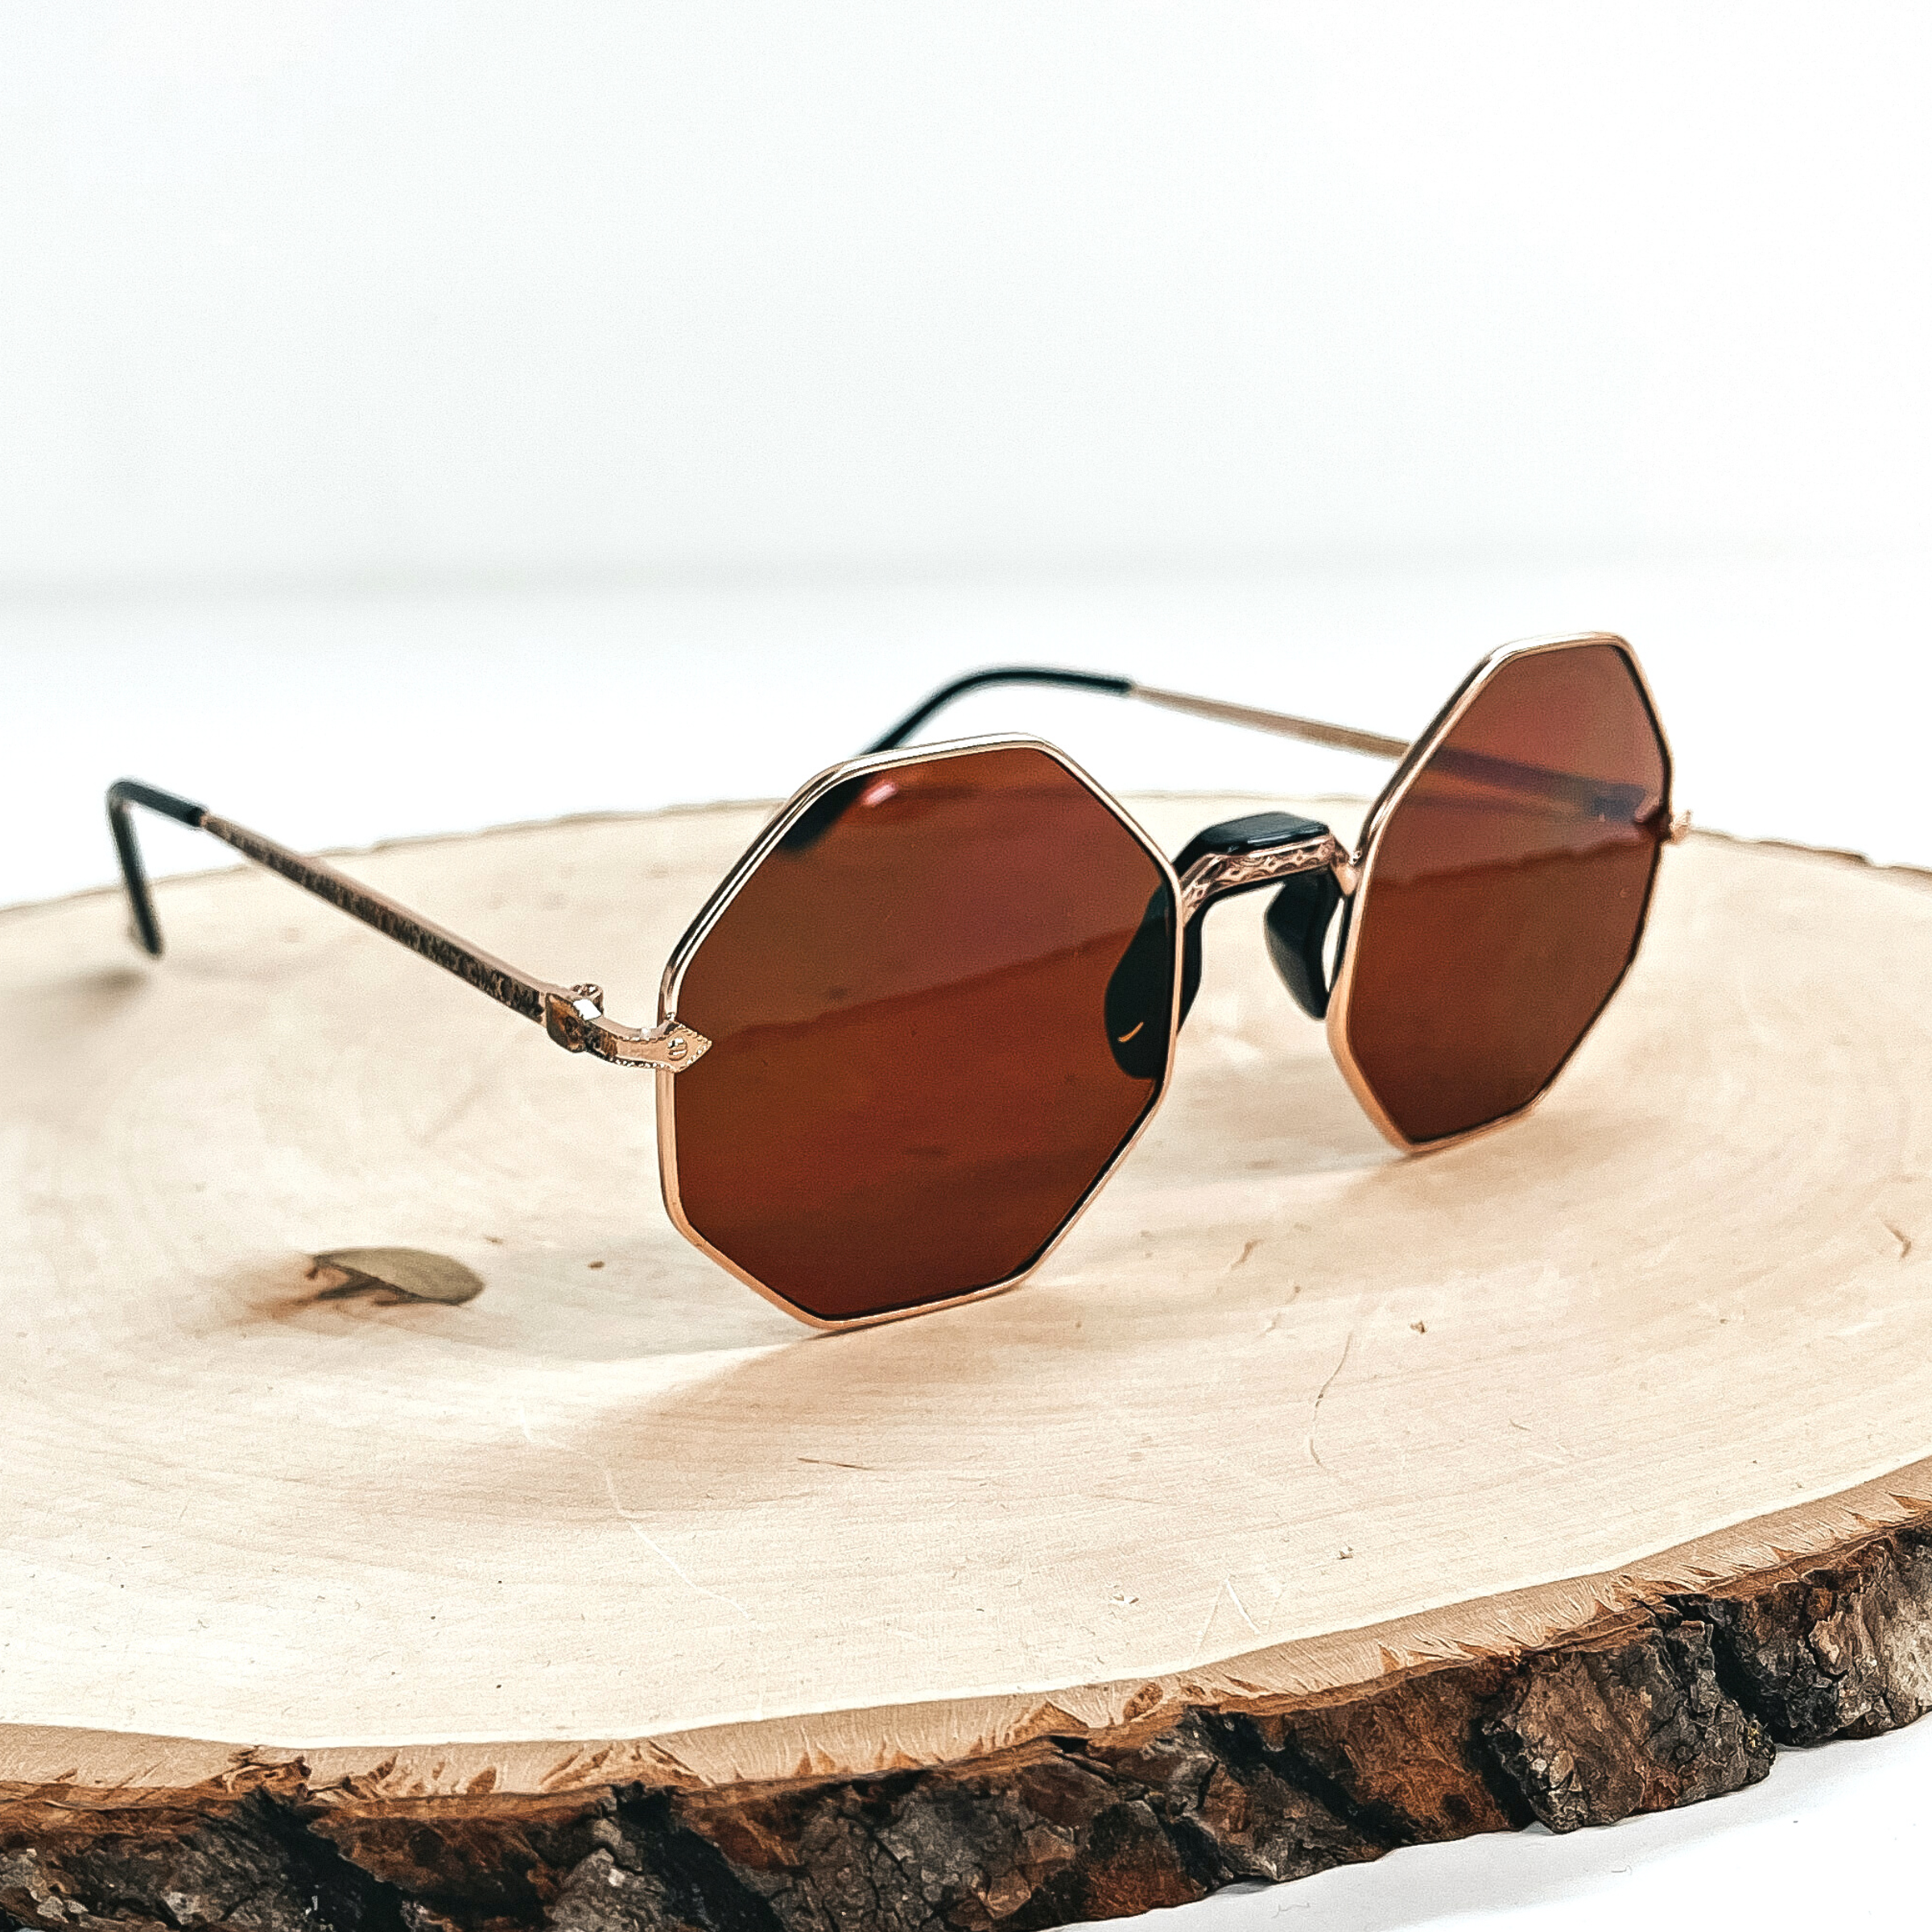 This is a pair of brown octagon sunglasses, the lense is brown with a  rose gold outline and a black nose piece. These pair of sunglasses are taken on a wooden slate and on a white  background.